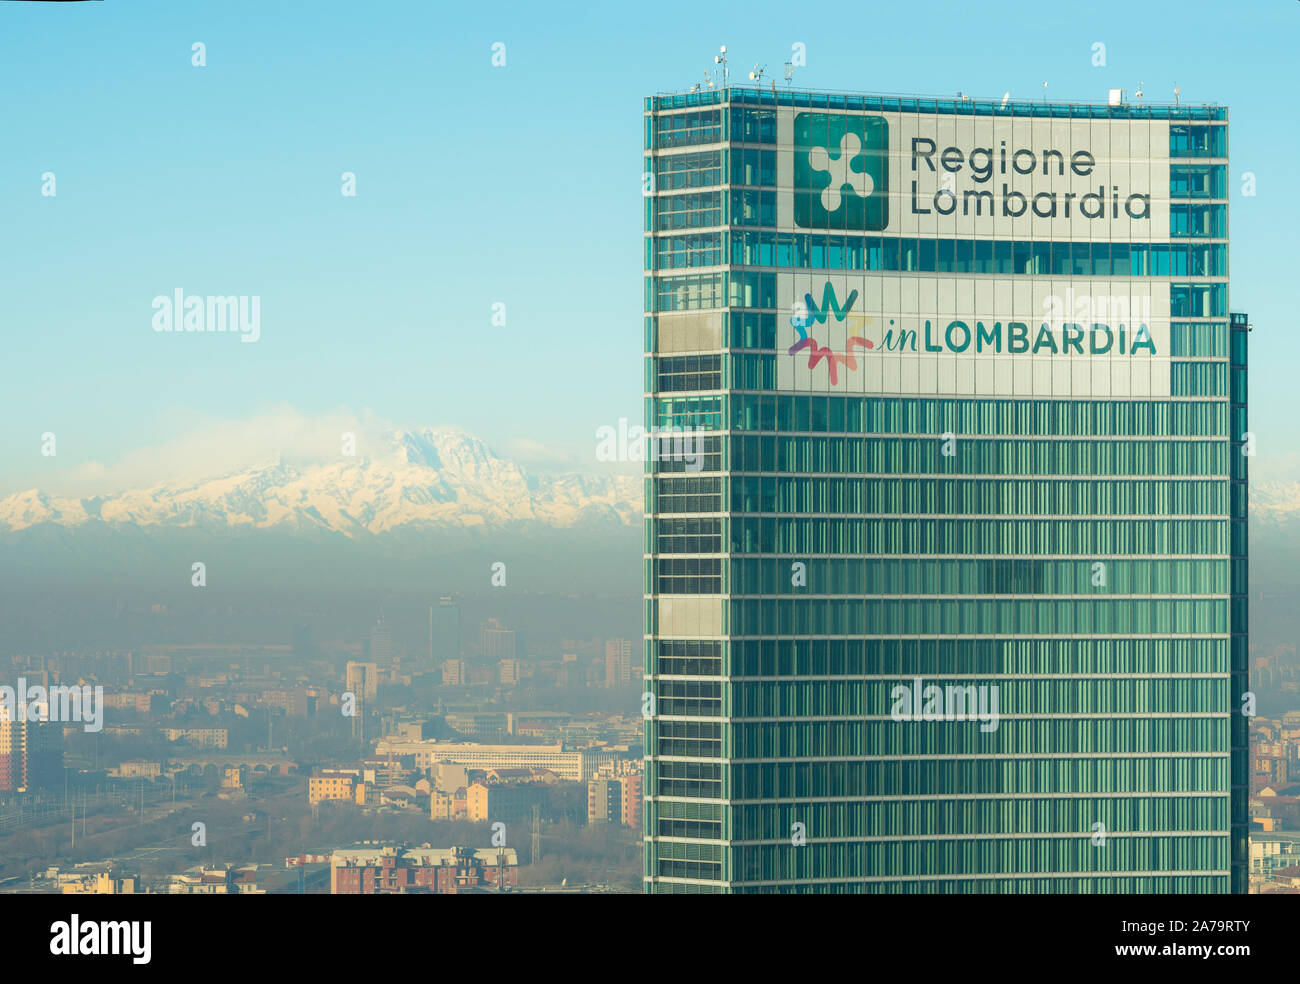 Milan Italy: The Lombardy Region headquarters building with the Italian Alps and Monte Rosa in the background. City of Milan covered by smog. Stock Photo